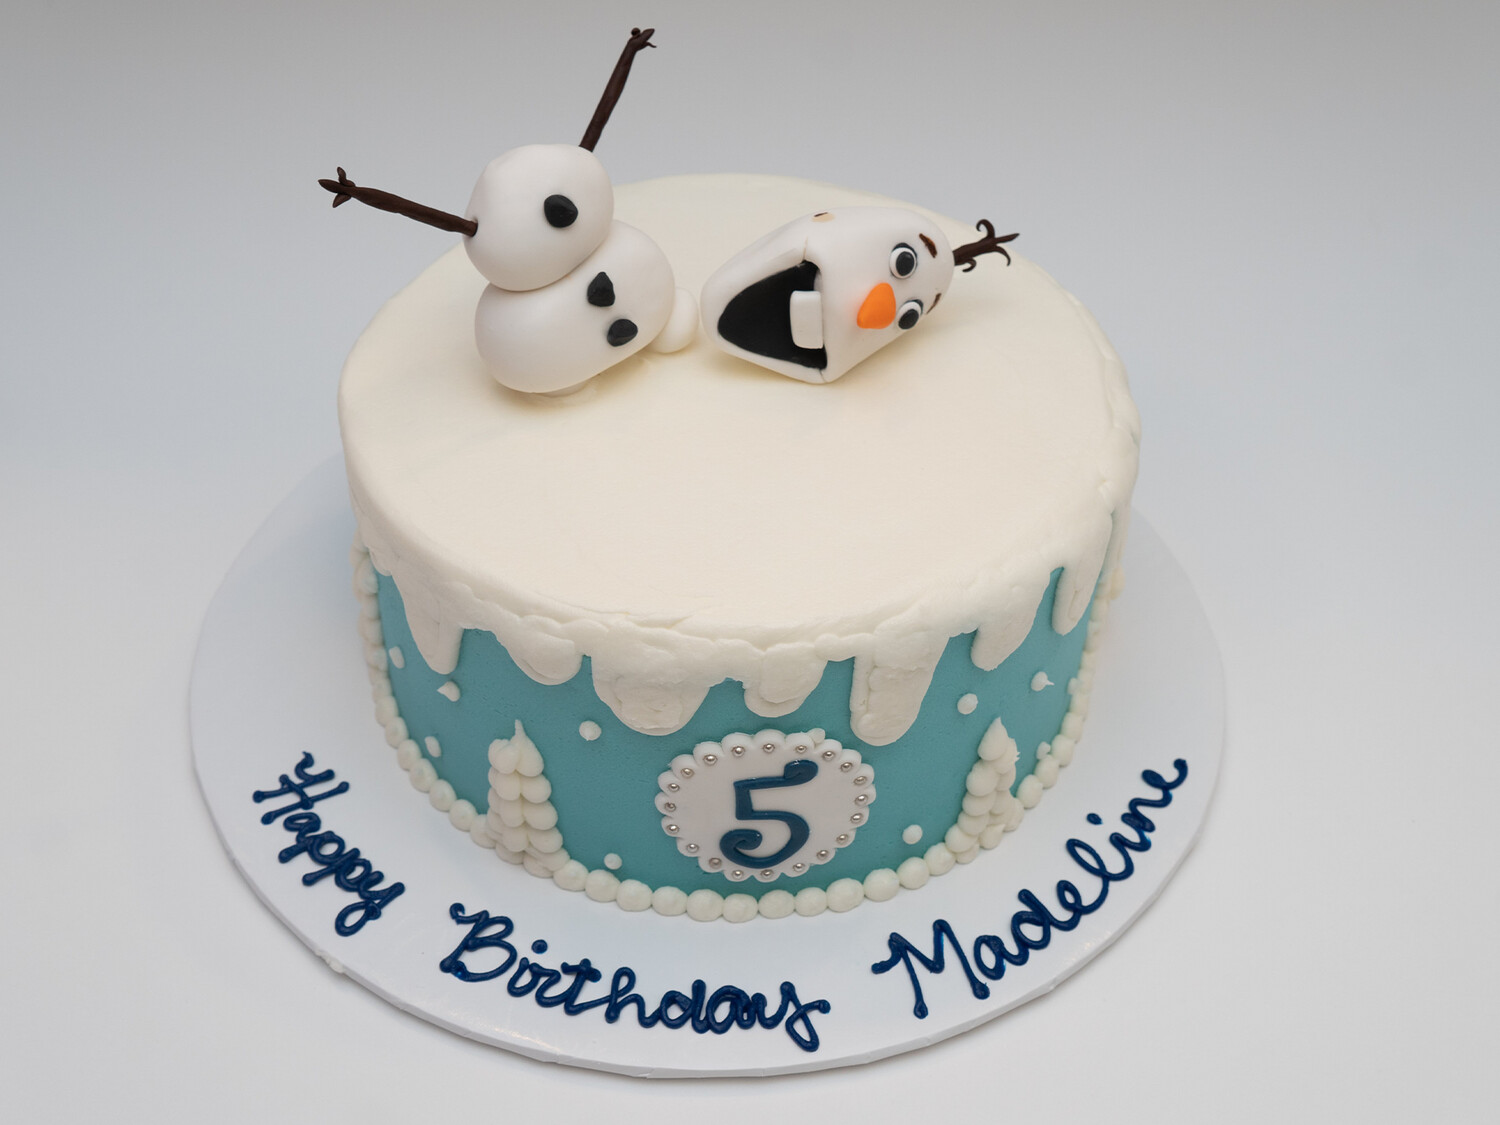 Olaf Lost His Head Cake